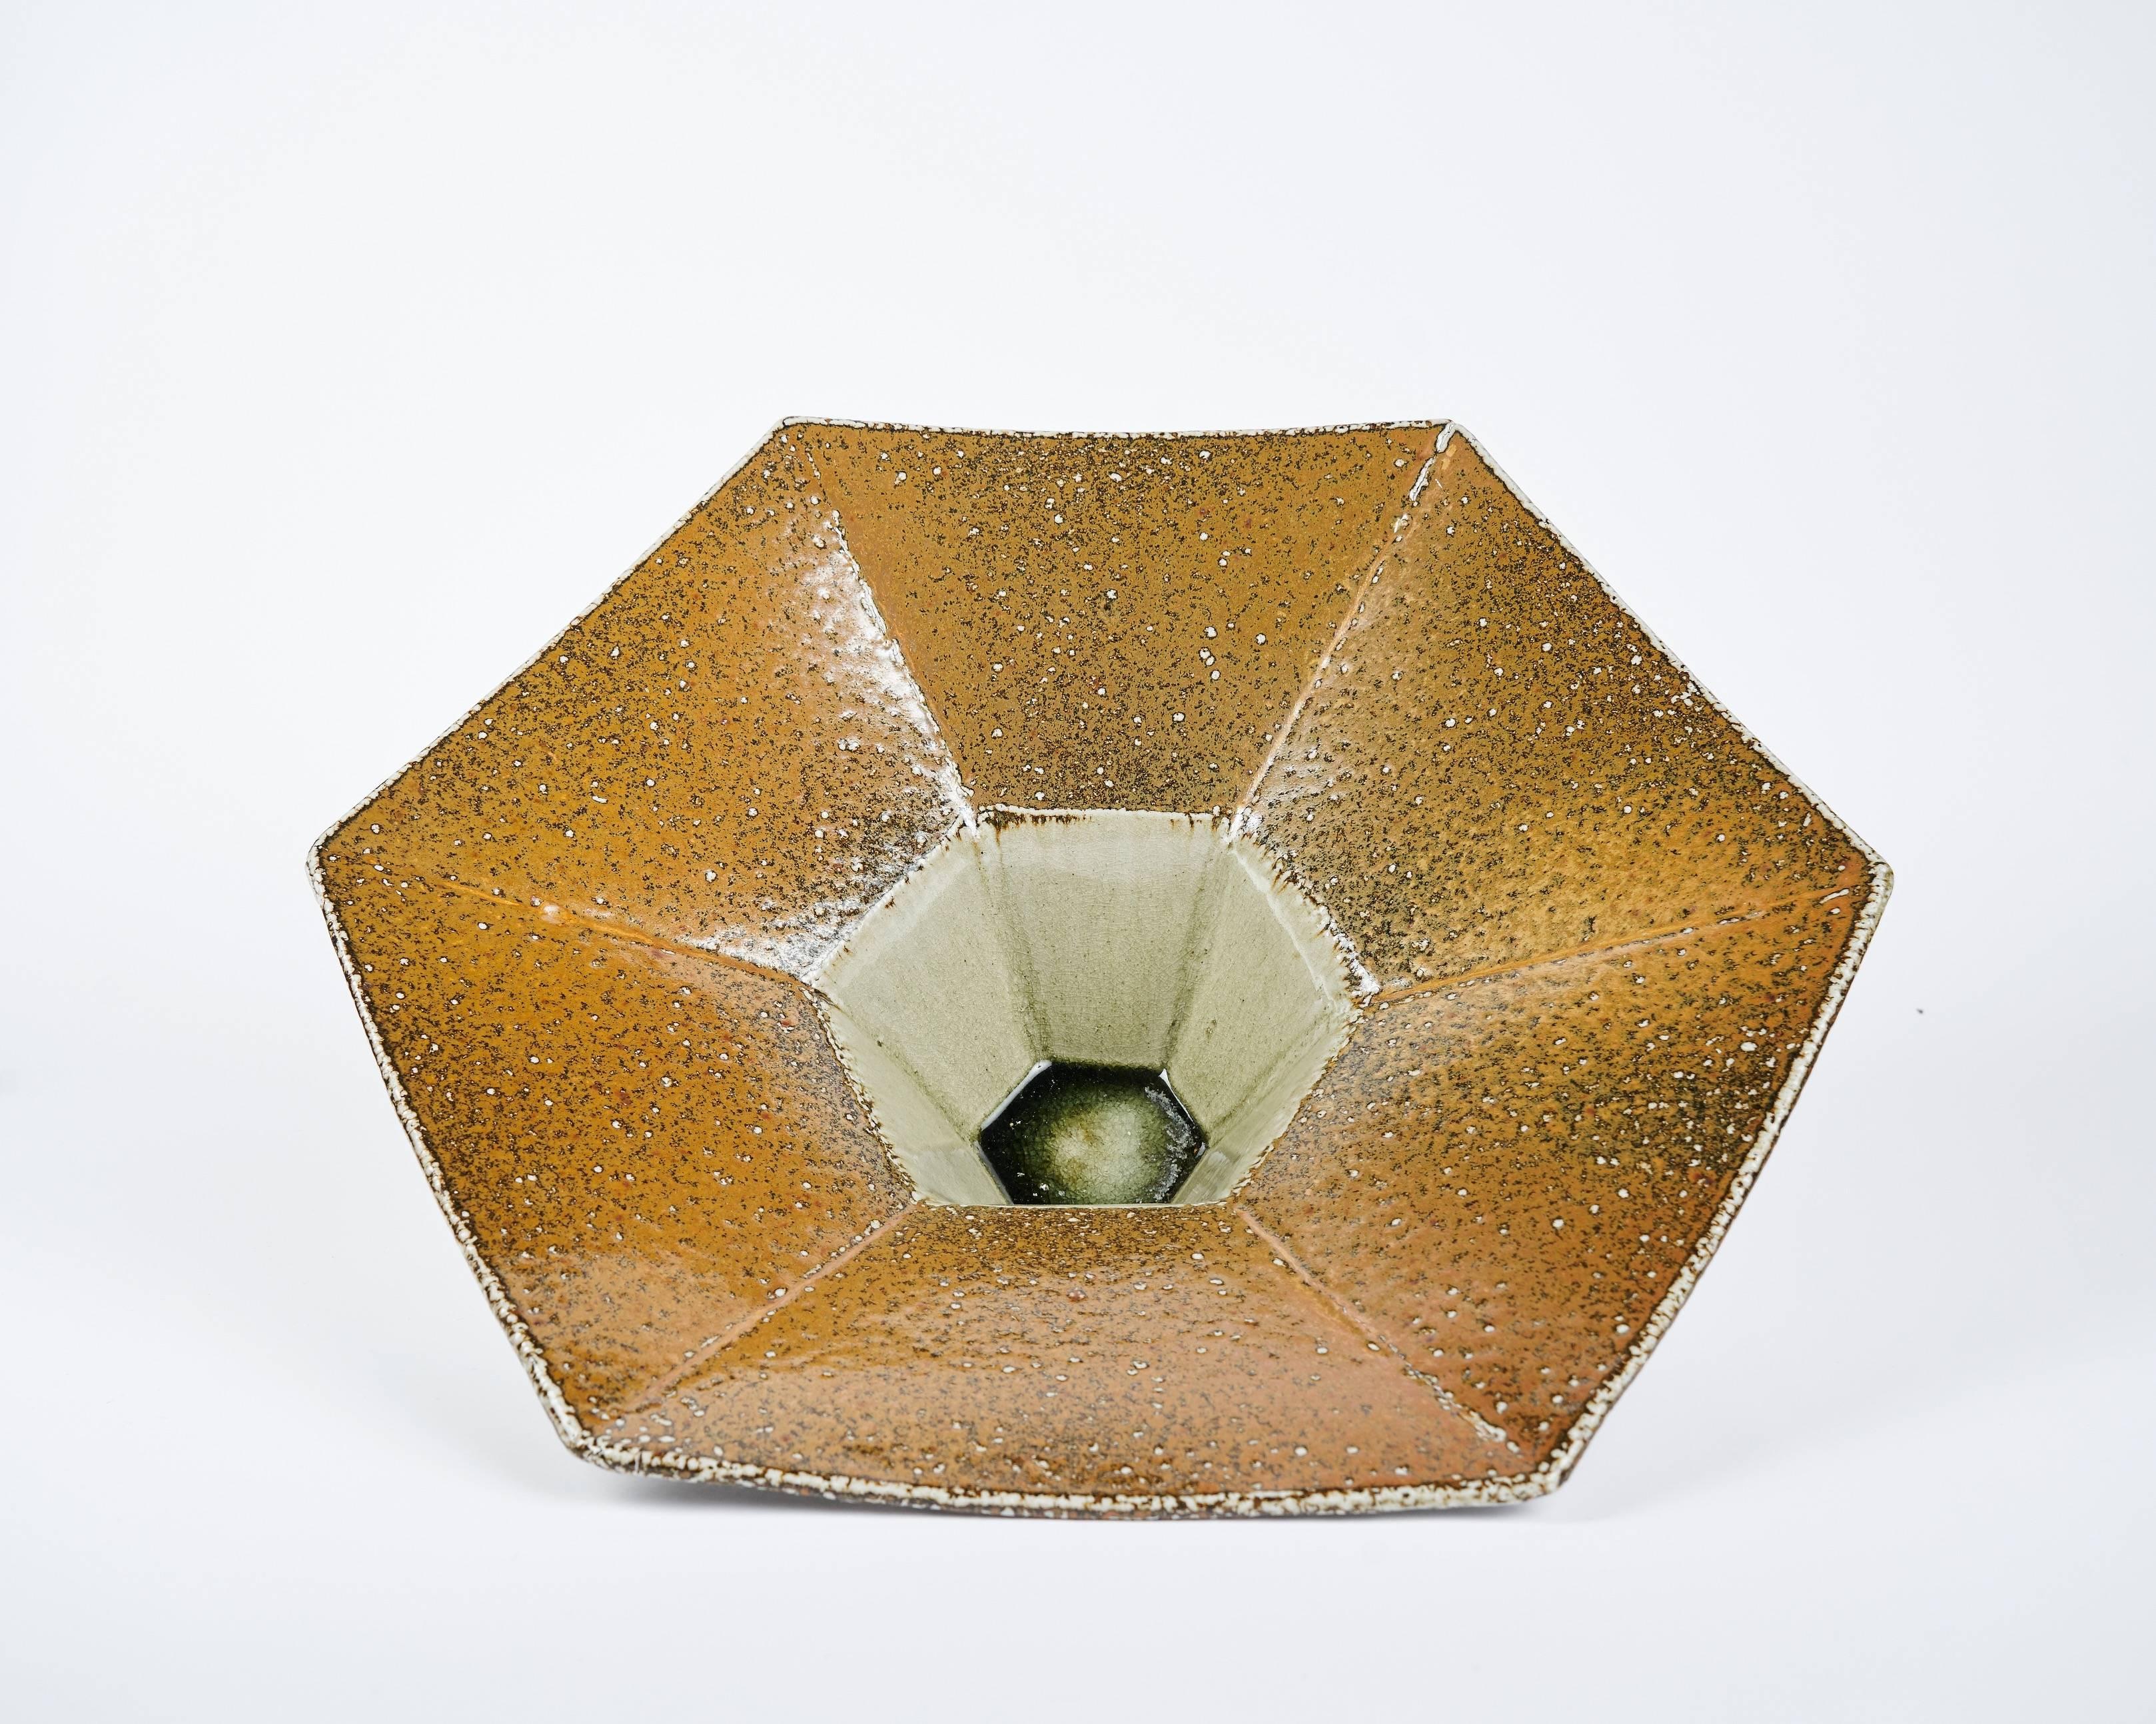 This twisted, faceted vase by contemporary Danish ceramicist Aage Birck, possesses a rigidity and texture unique for the medium.